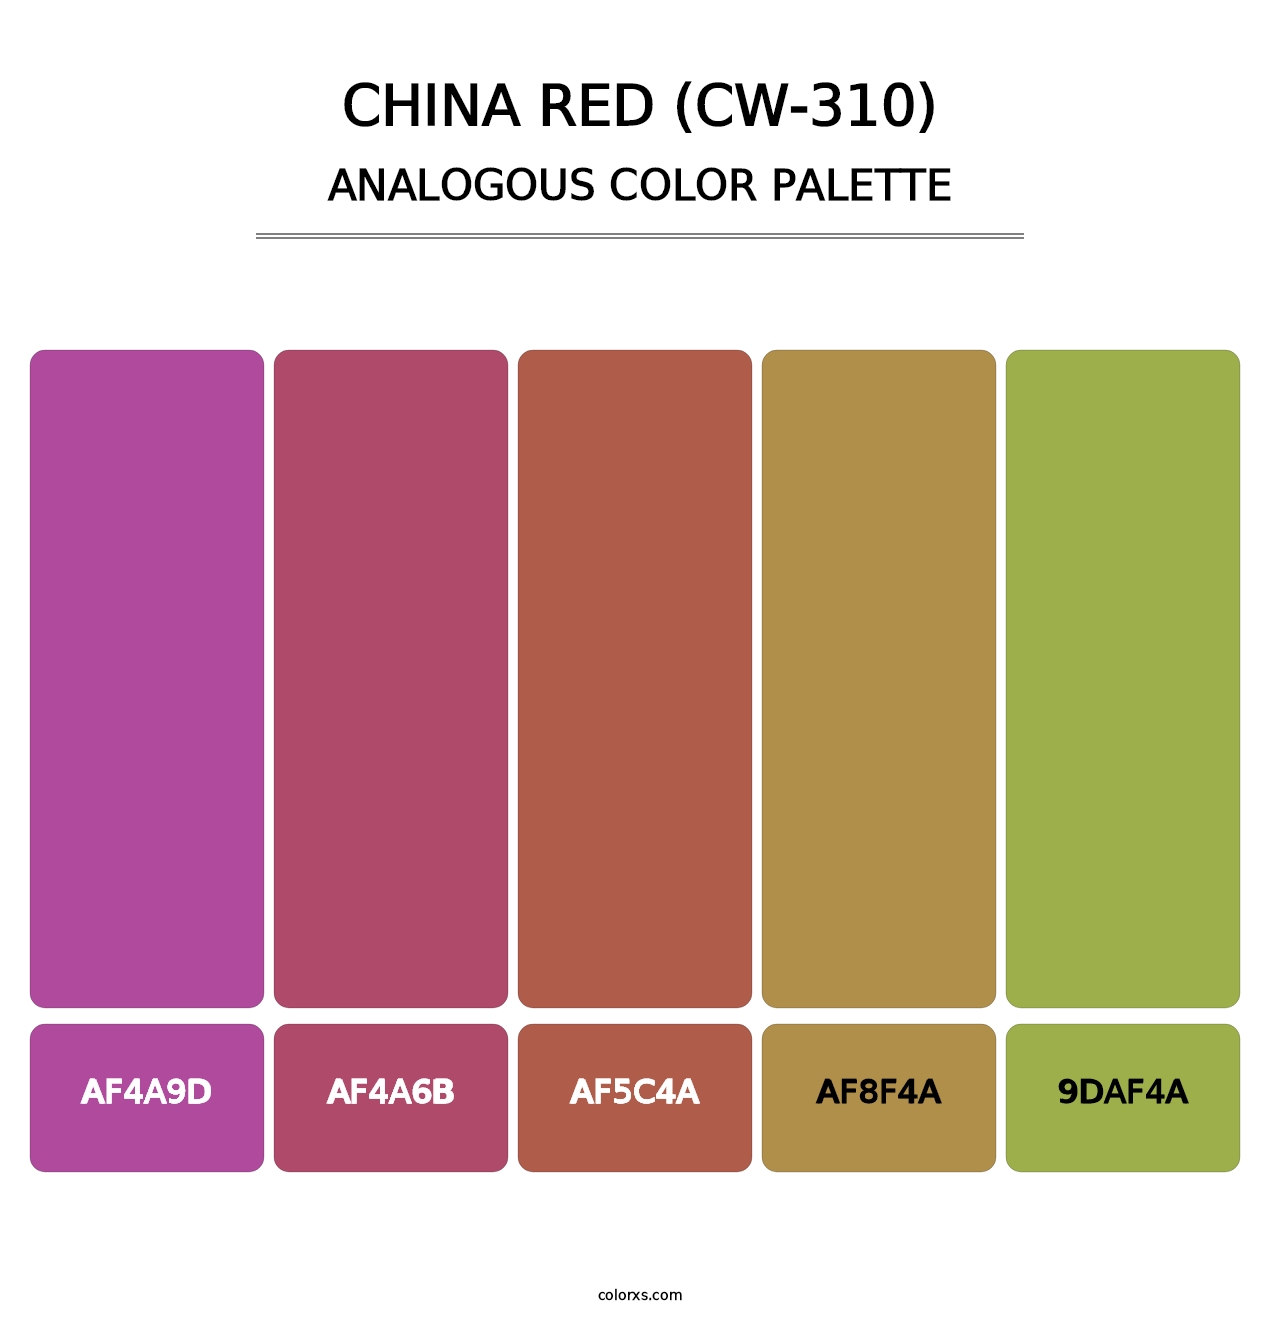 China Red (CW-310) - Analogous Color Palette